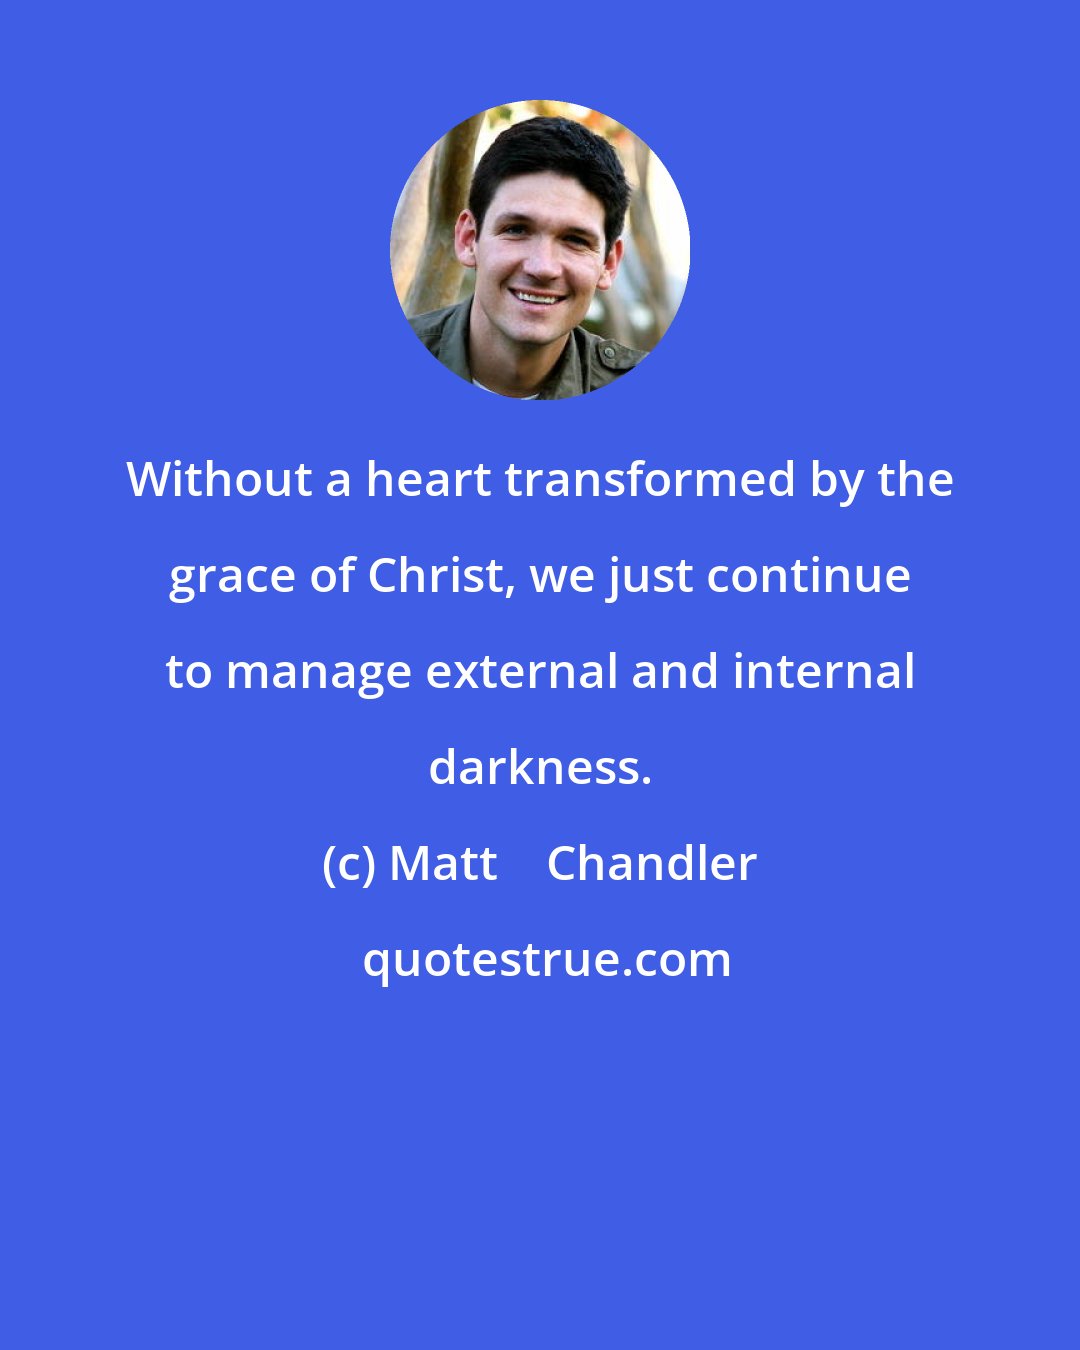 Matt    Chandler: Without a heart transformed by the grace of Christ, we just continue to manage external and internal darkness.